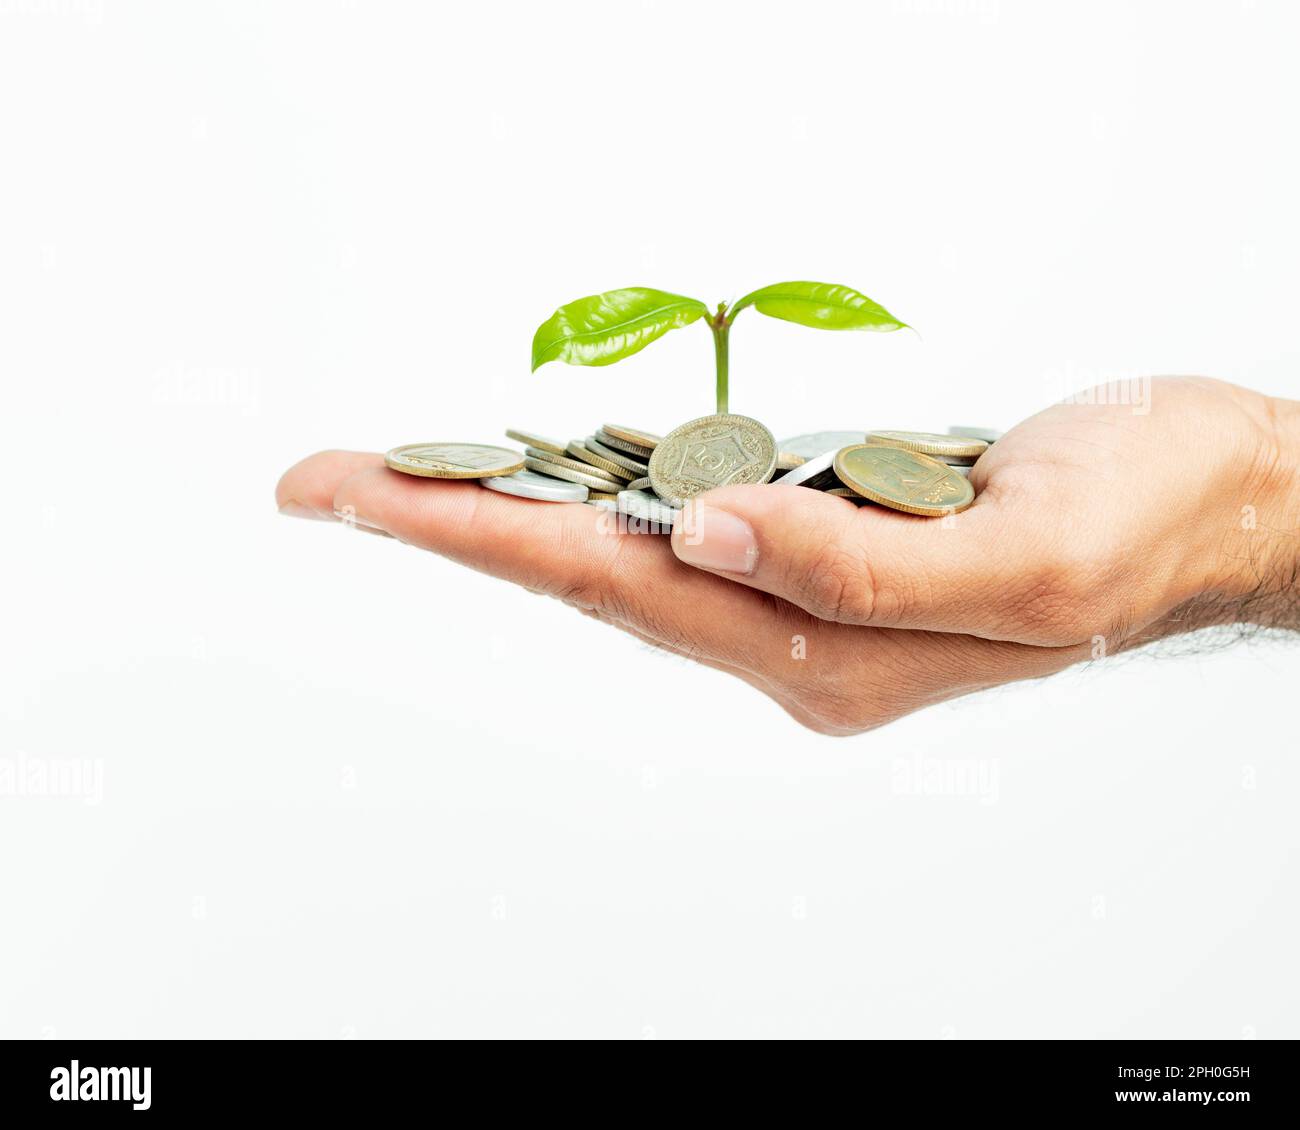 Hand of man with tree growing from pile of coins, pakistani currency Stock Photo